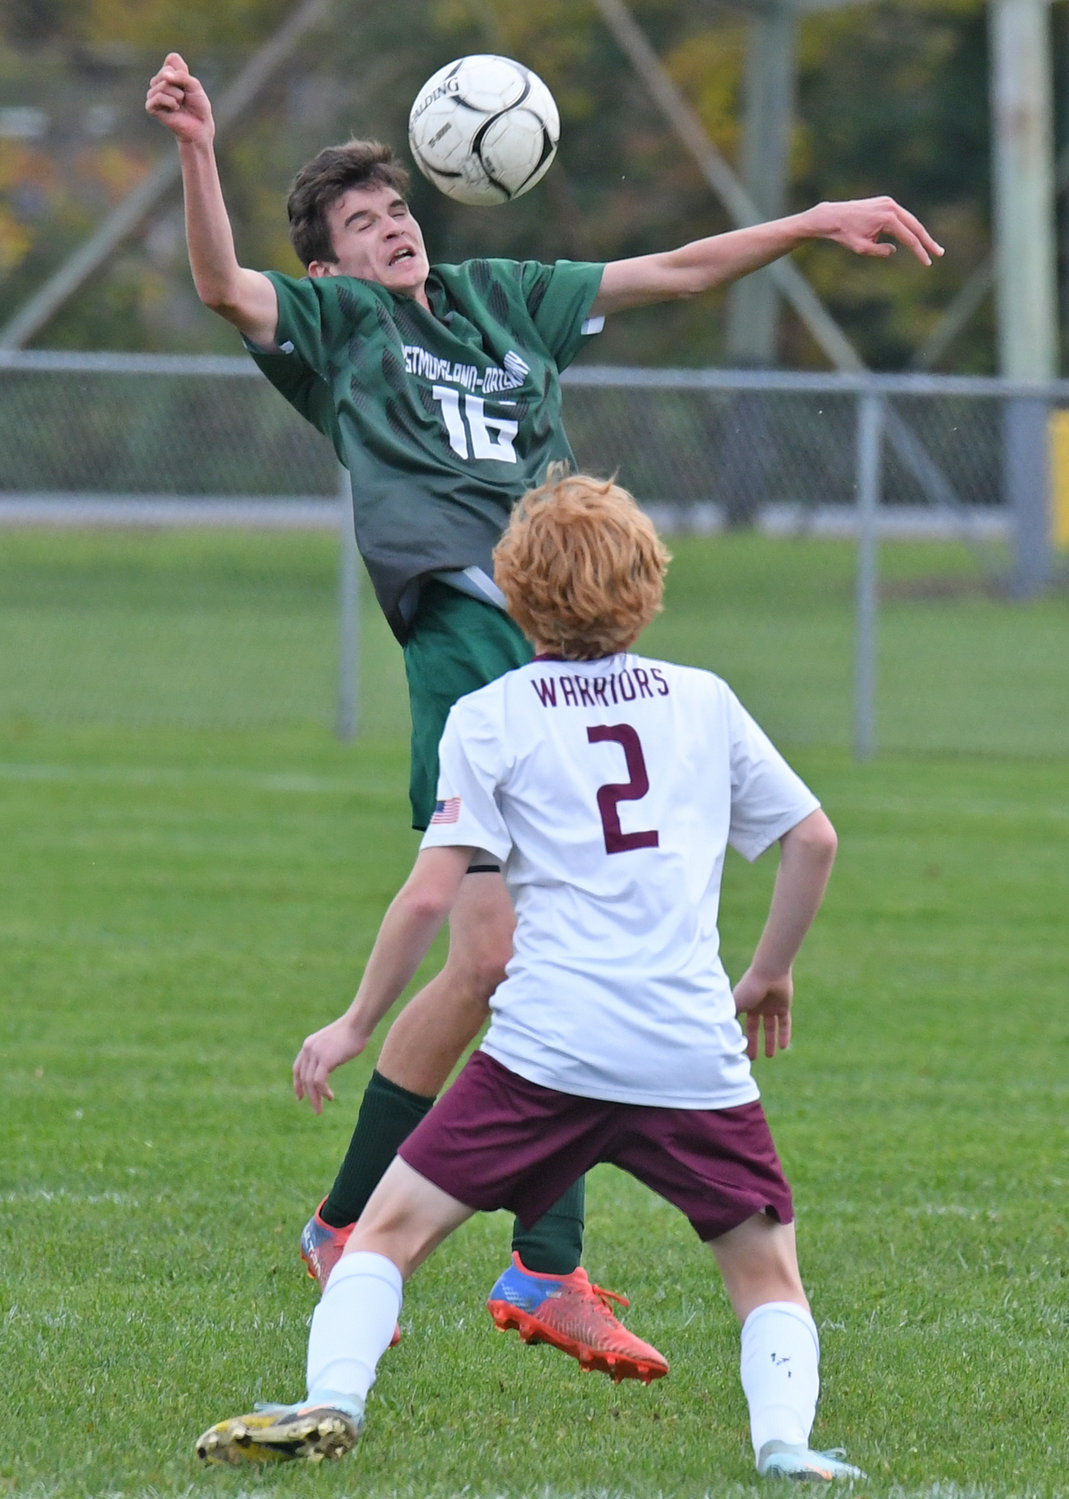 Westmoreland/Oriskany's Riley Smith gets up in the air for the ball in front of Clinton's Henry Schweitzer in the first half Wednesday afternoon in Westmoreland. The host Bulldogs won 2-1 to win the Center State Conference Division I regular season title.